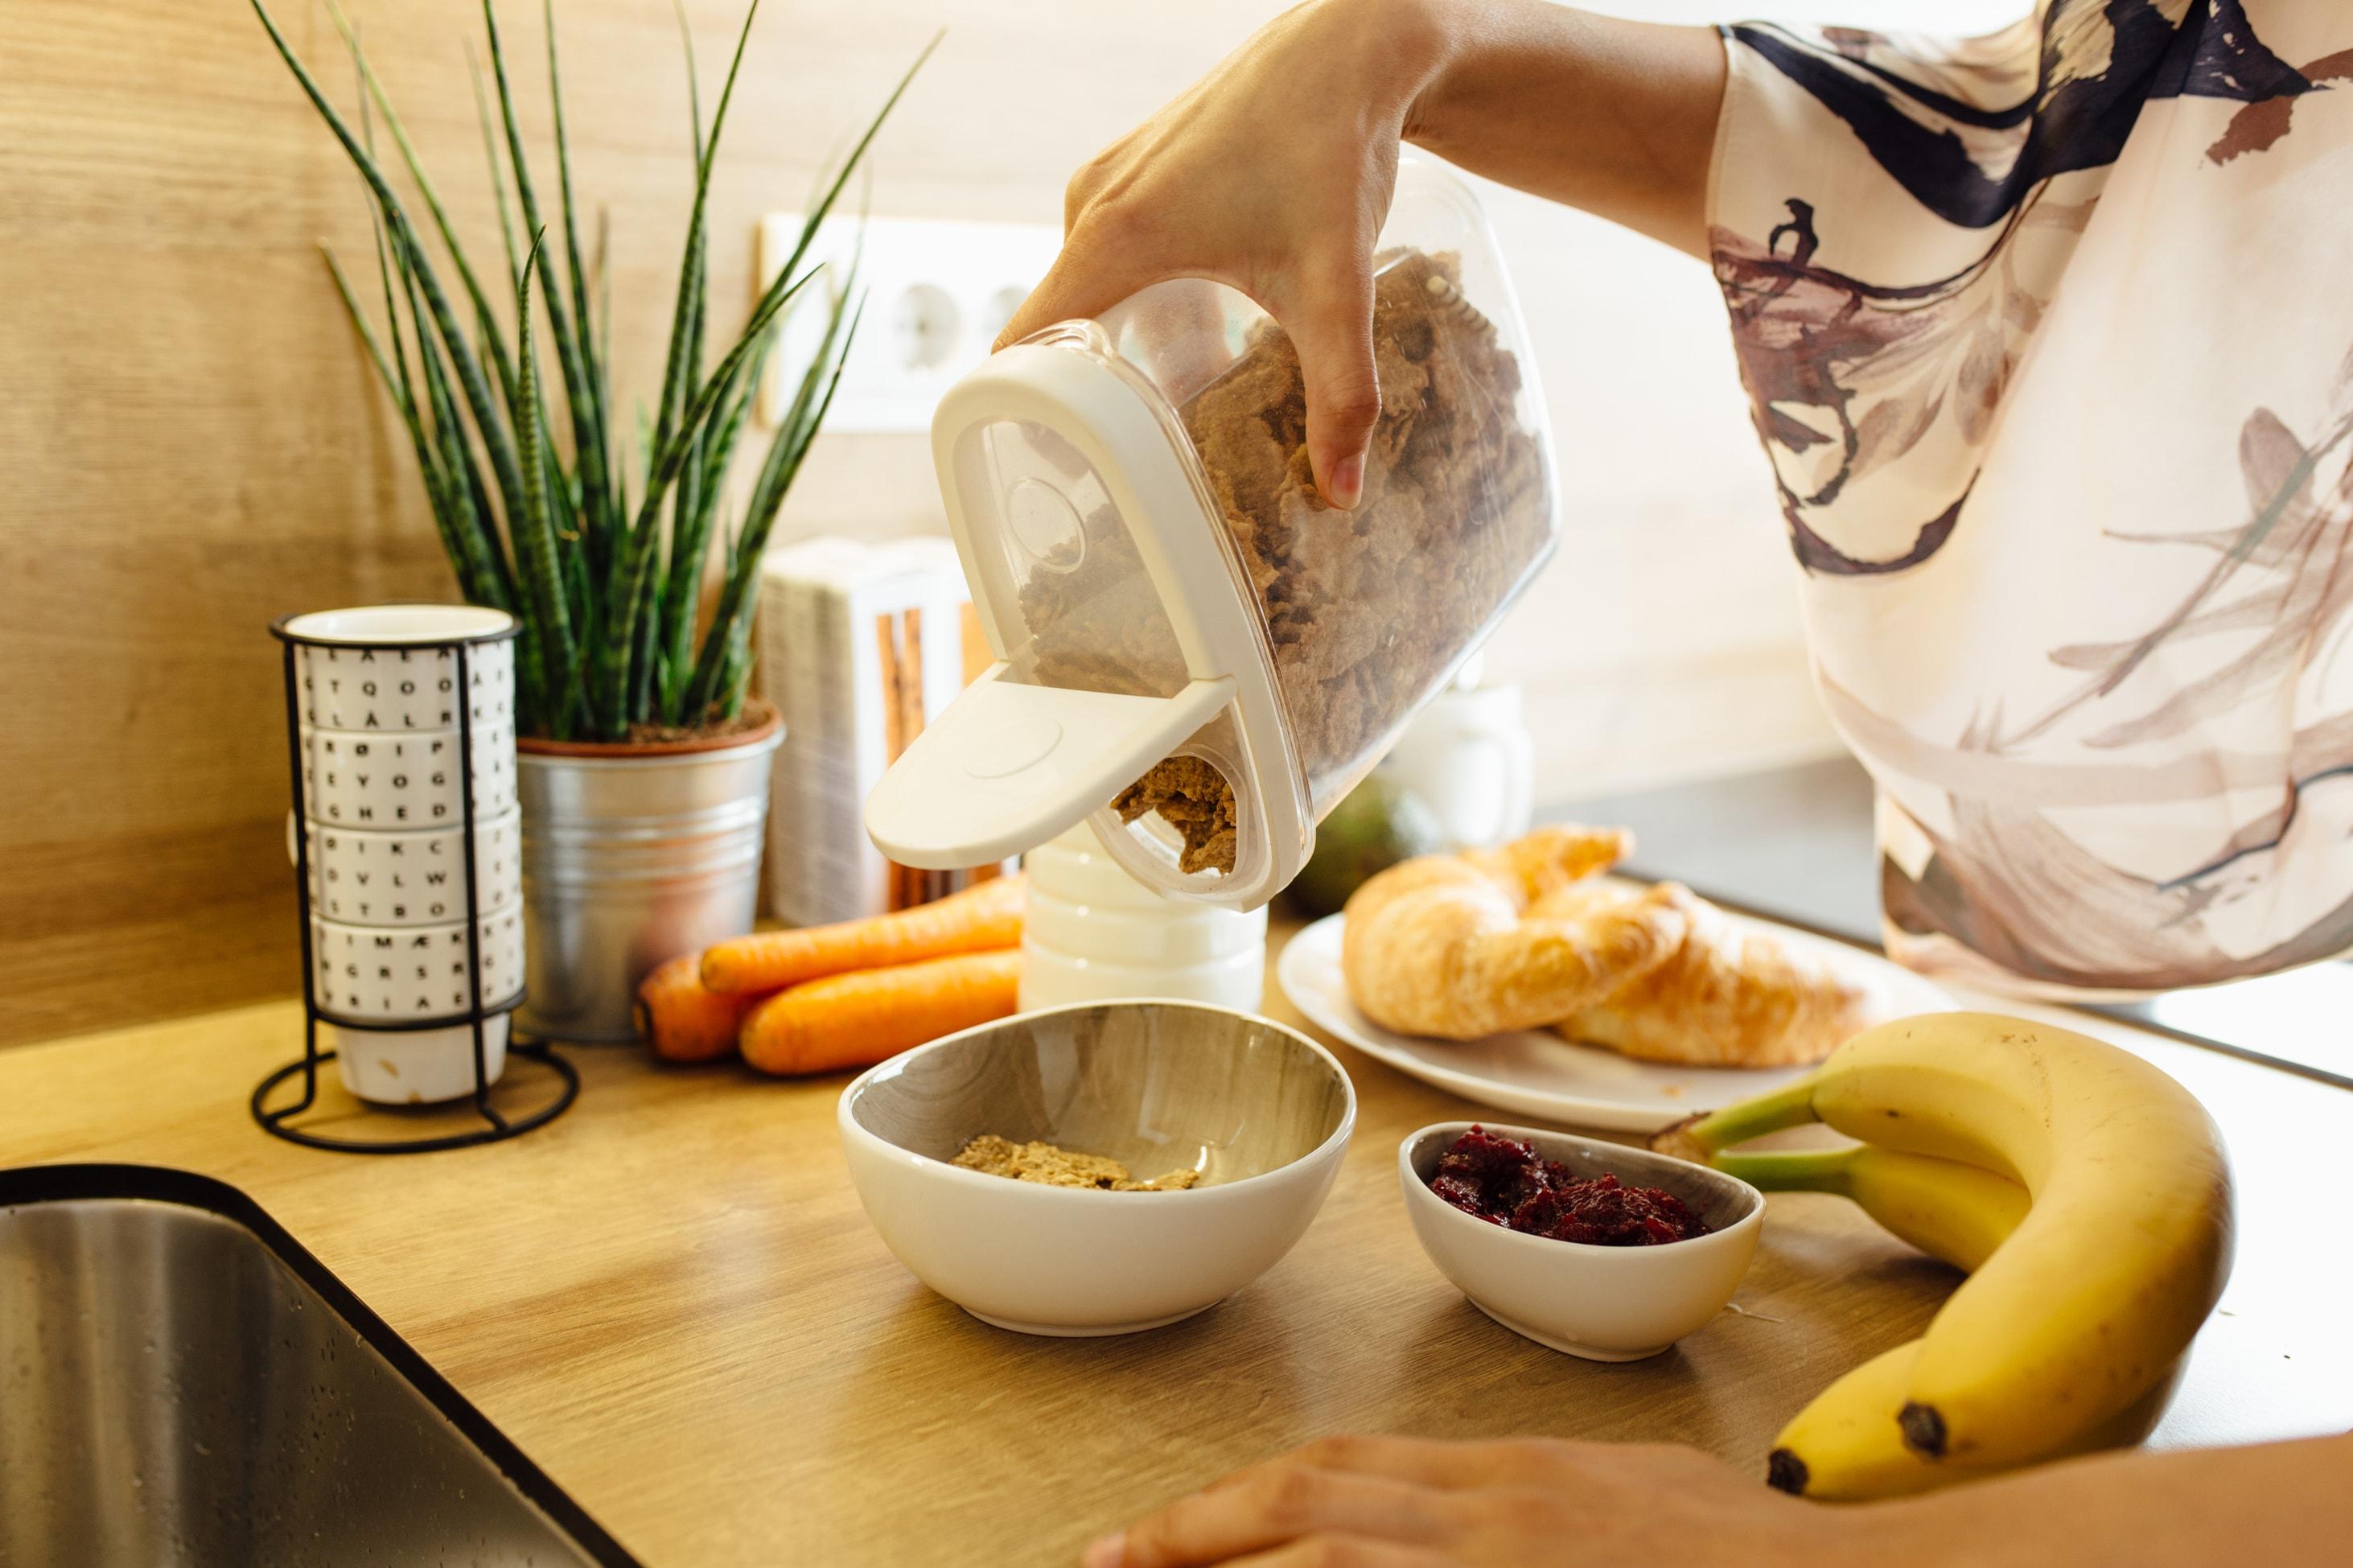 A woman stands in her kitchen pouring granola into a cereal bowl next to dried cranberries, bananas, carrots and croissants.